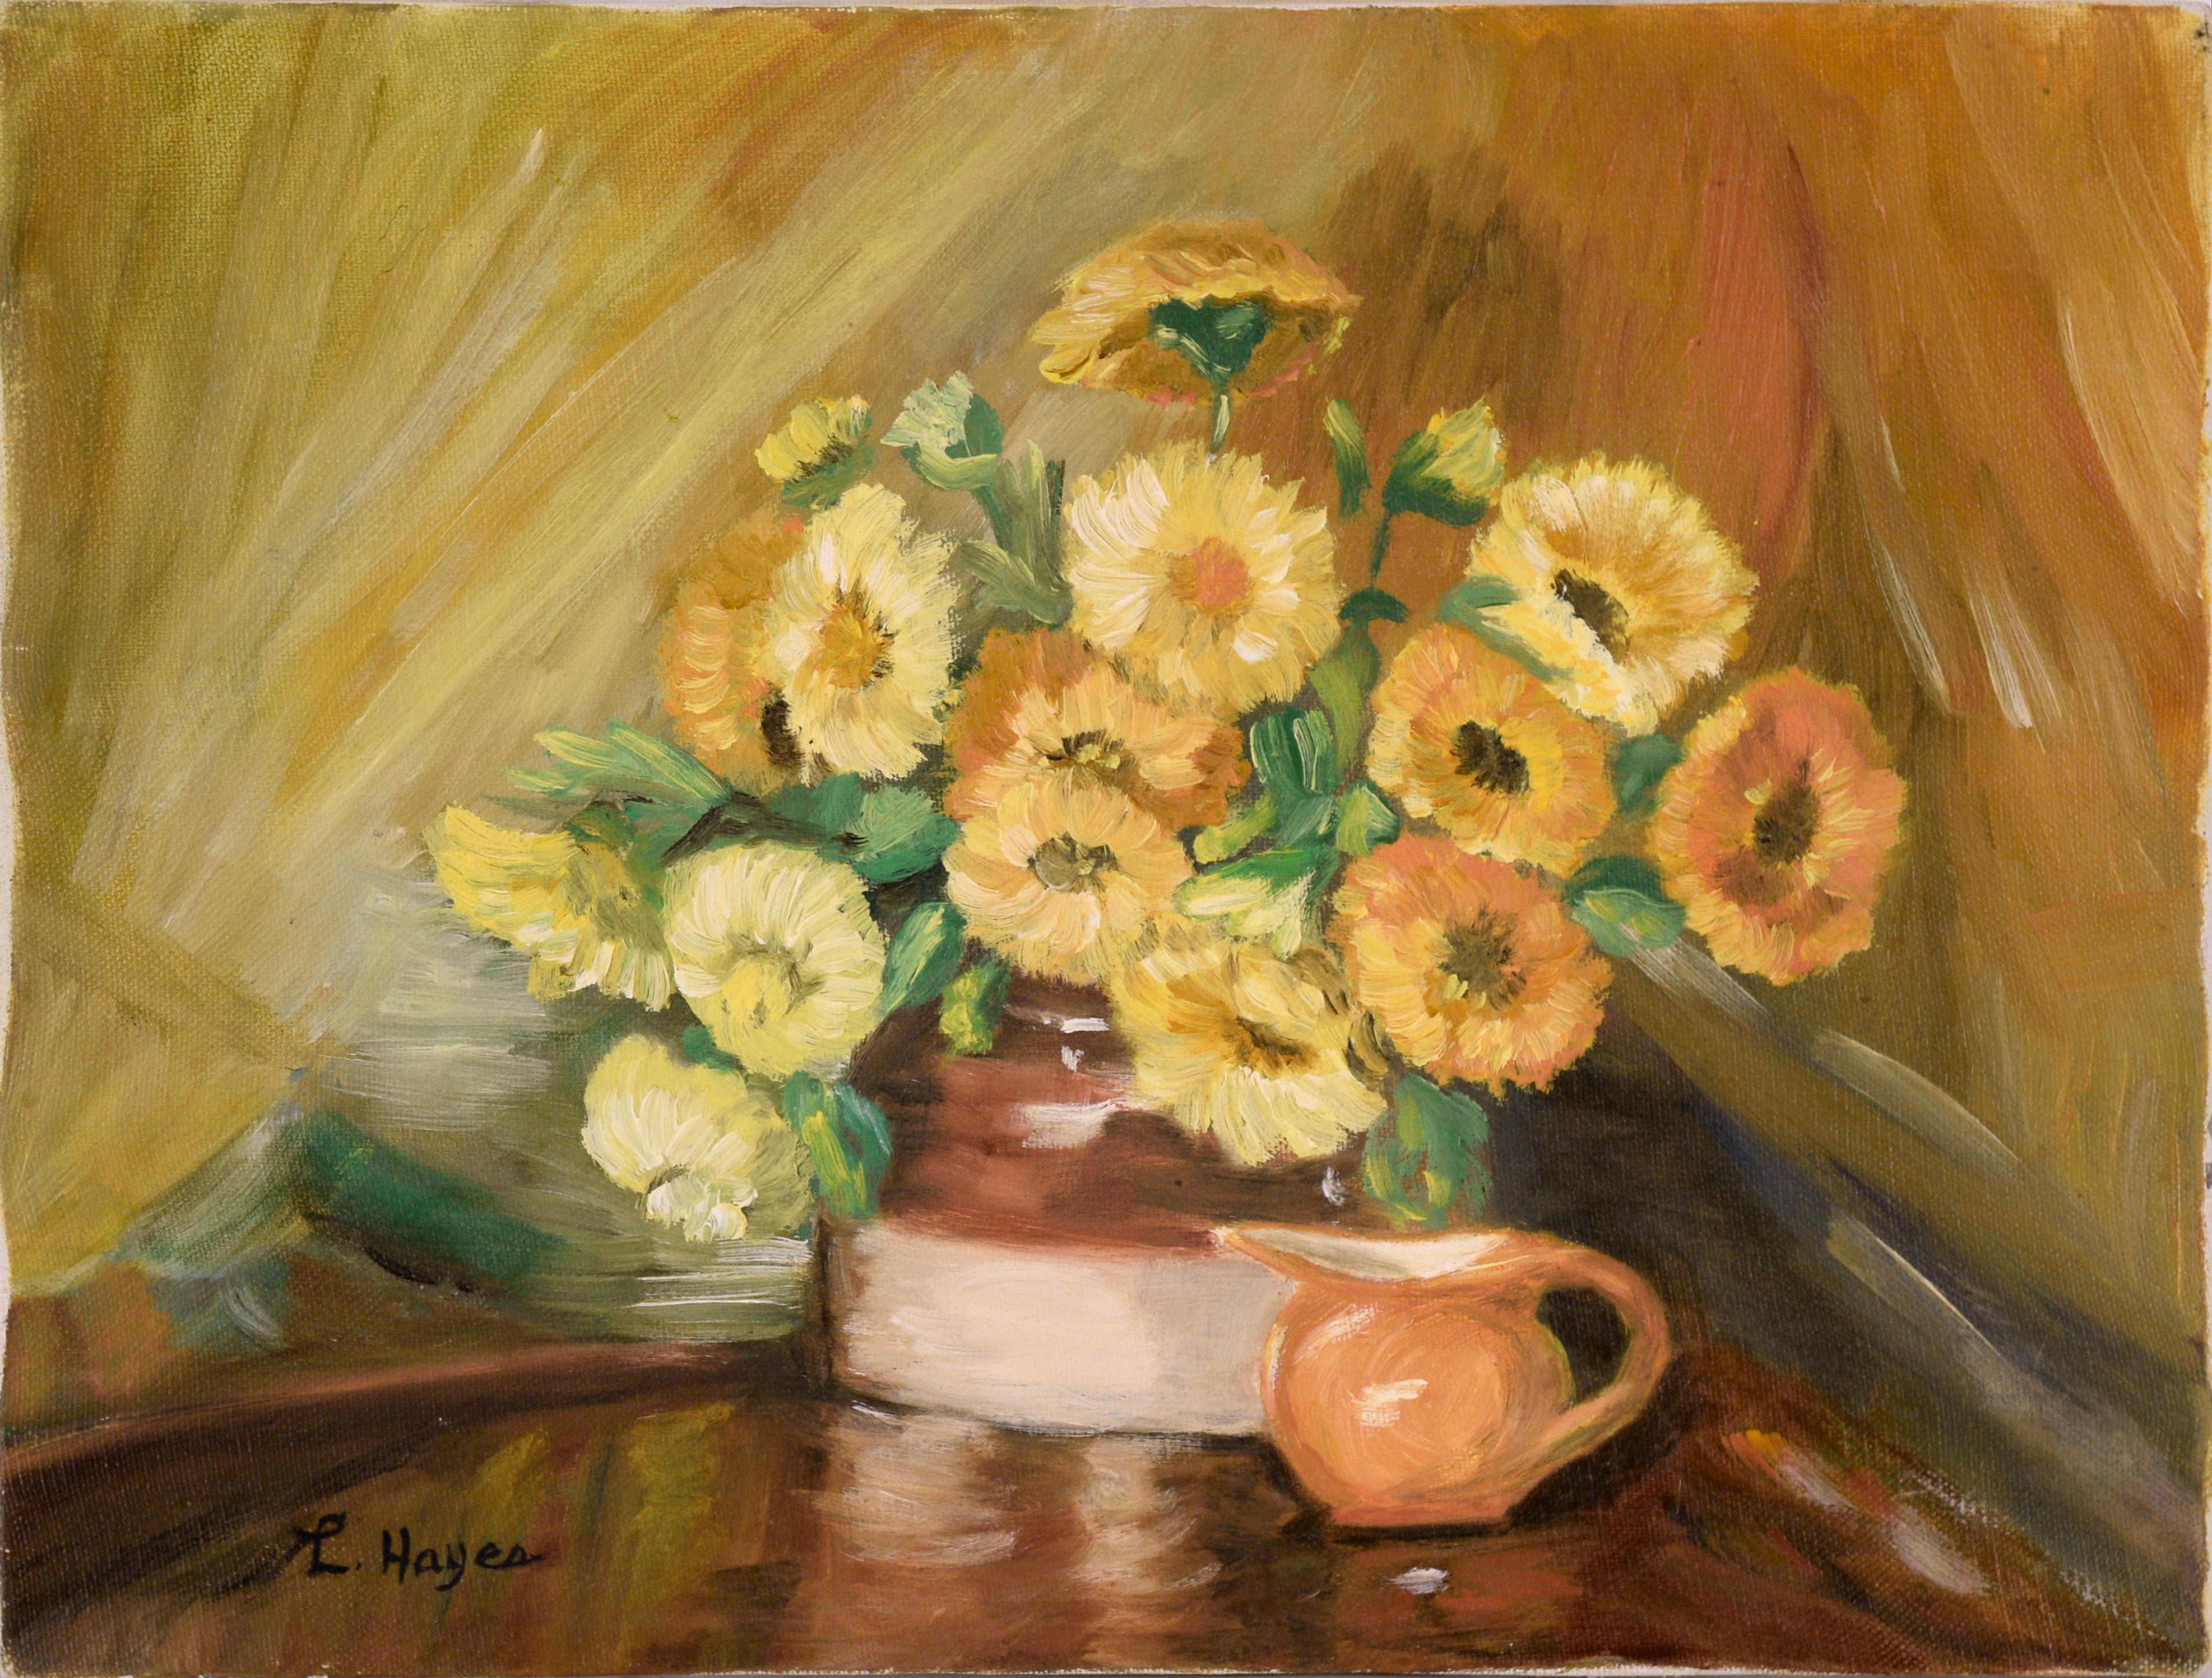 Unknown Still-Life Painting - Calendula Still Life with Pitcher in Oil on Canvas